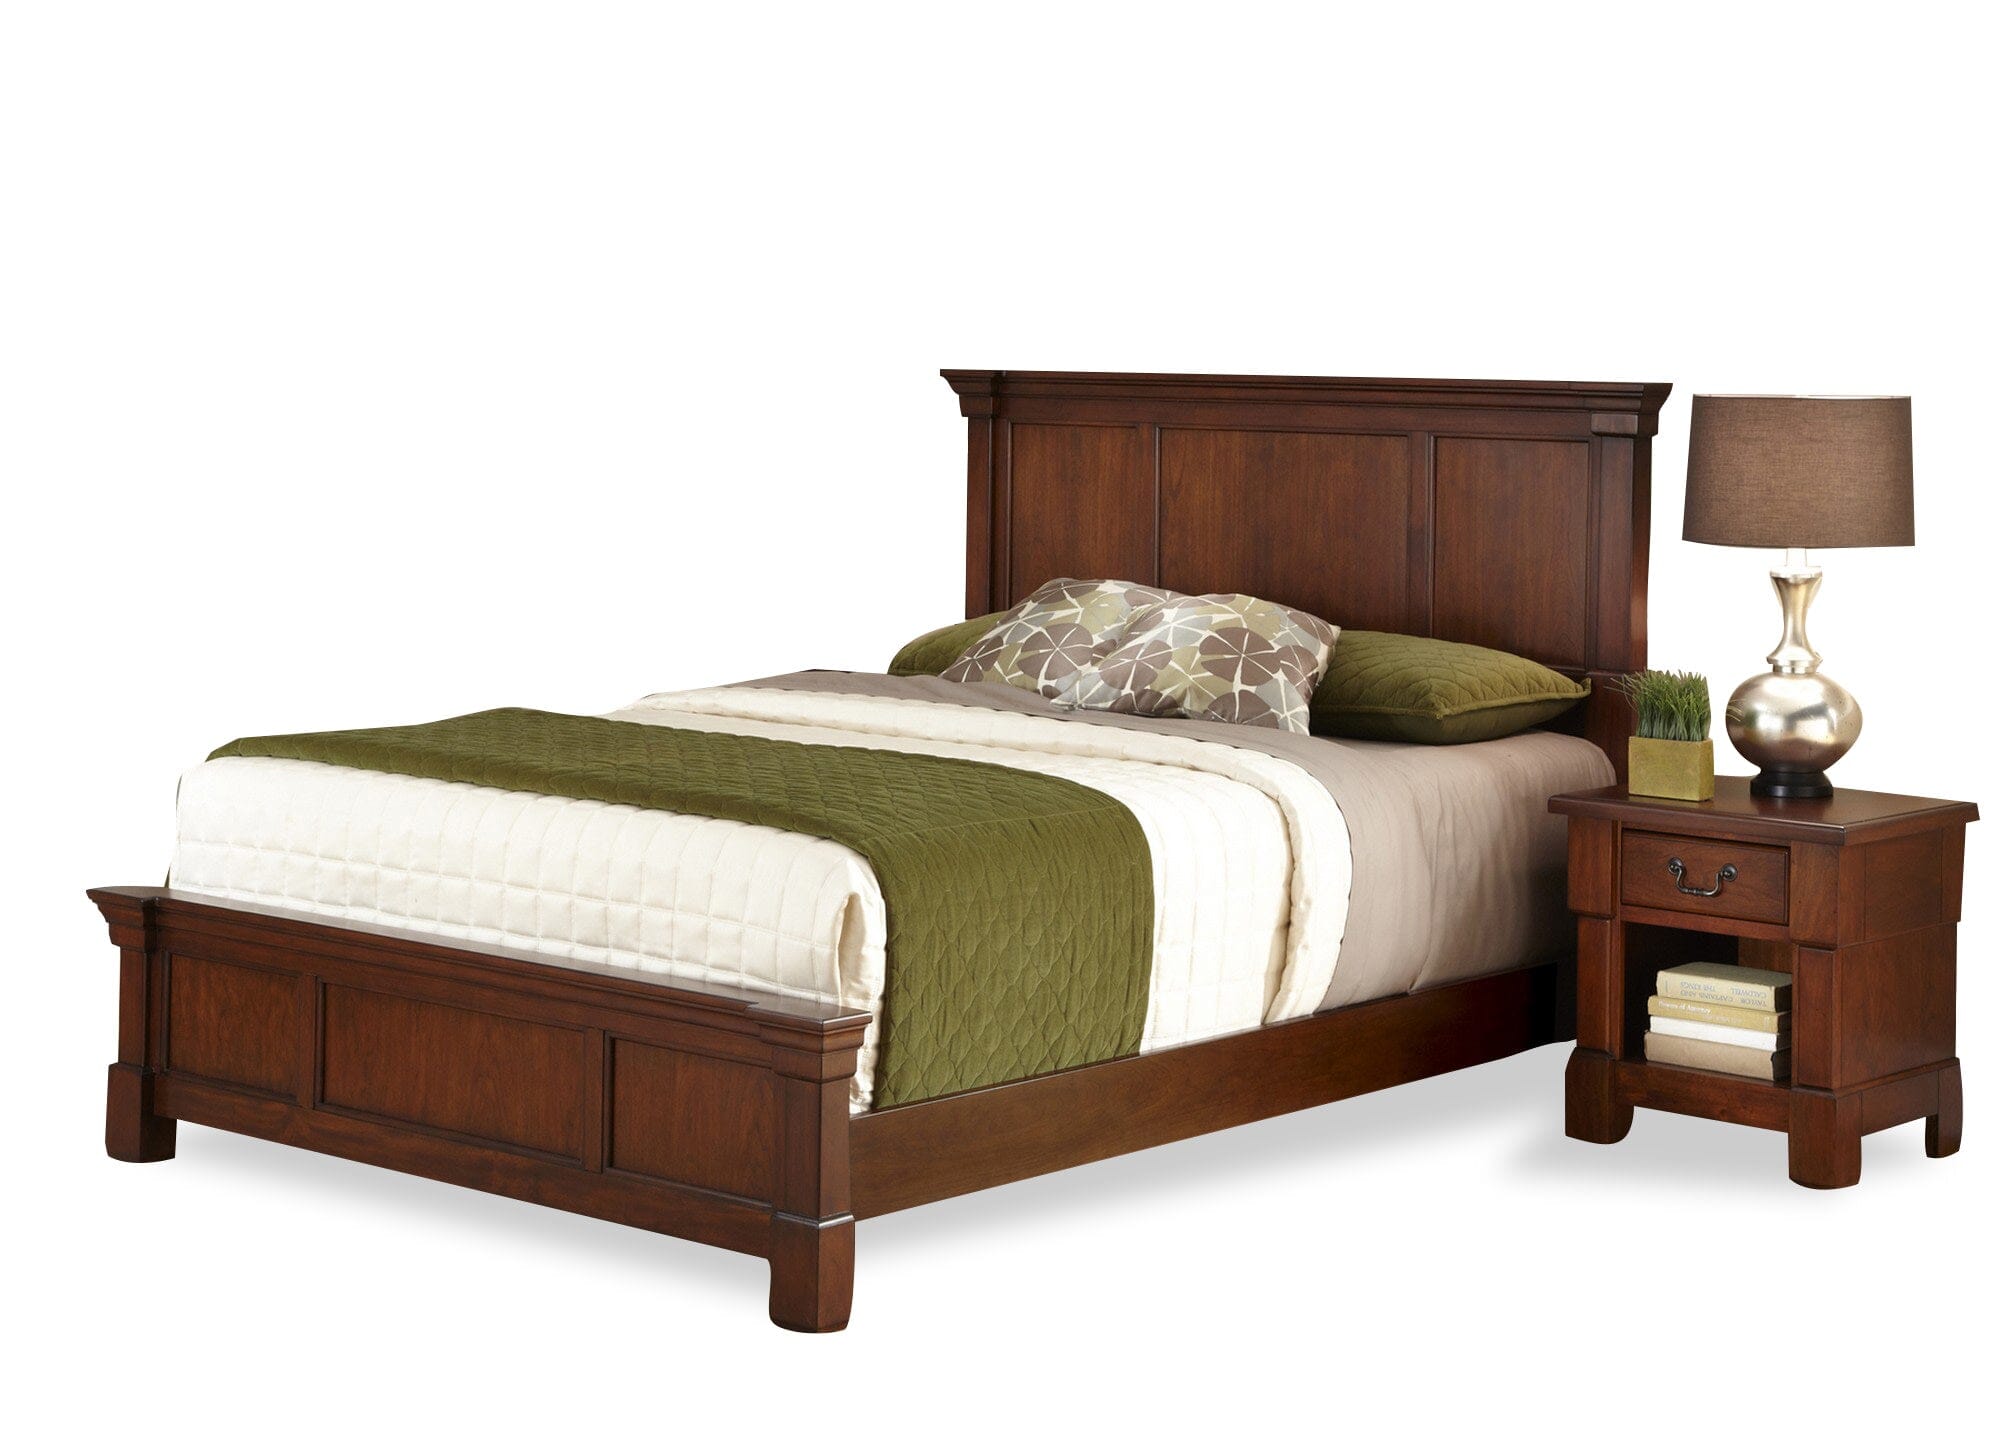 Traditional King Bed and Nightstand By Aspen King Bed Set Aspen